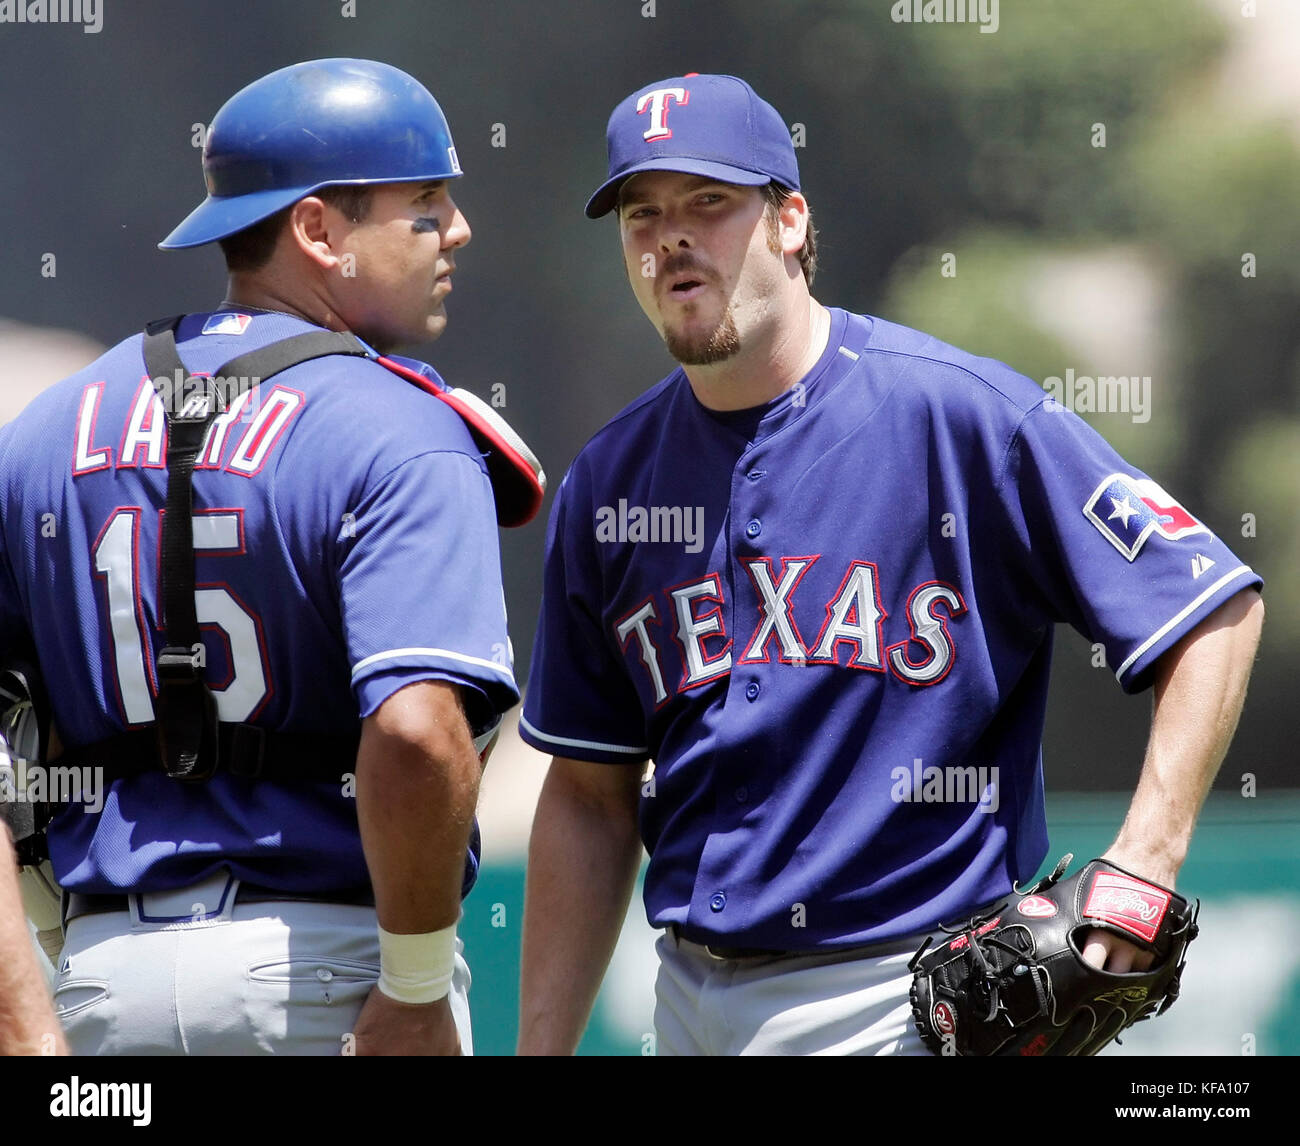 Texas Rangers pitcher Adam Eaton, right,  reacts with catcher Gerald Laird after his ejection from the game by home plate umpire Rob Drake in the first inning of a baseball game against the Los Angeles Angels in Anaheim, Calif., on Sunday, Aug. 6, 2006. Photo by Francis Specker Stock Photo